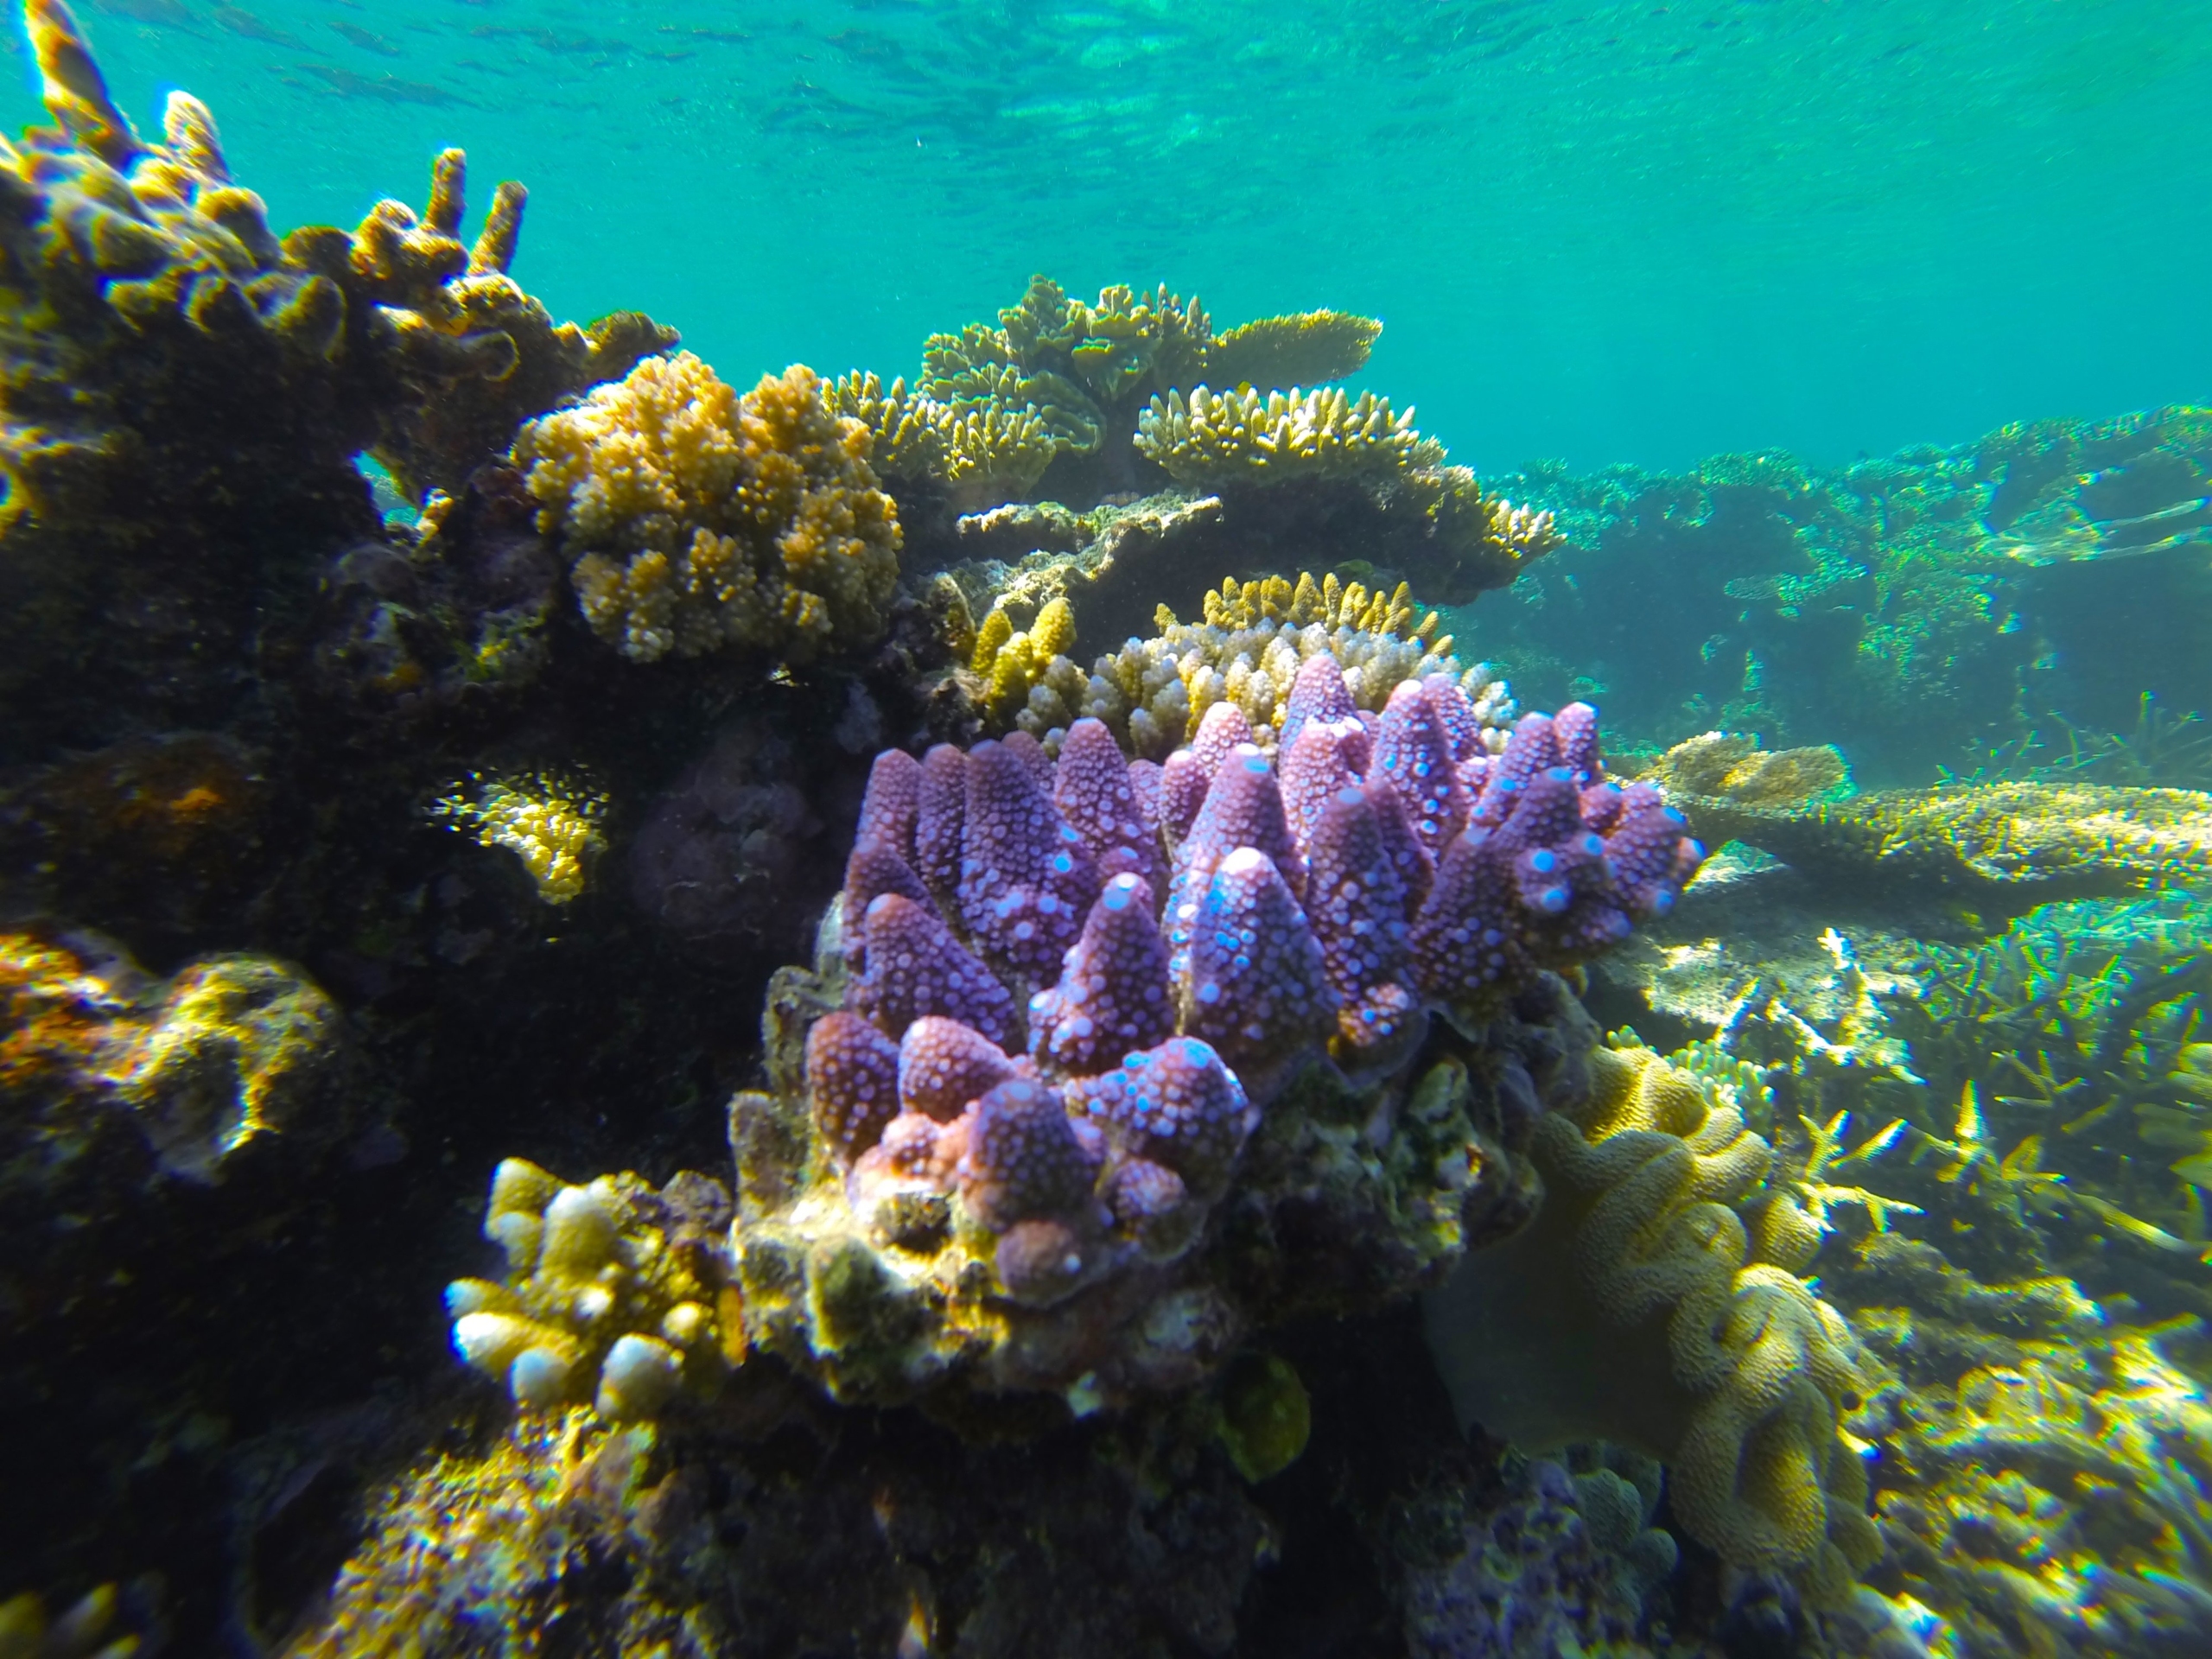 The UN has announced the threat of extinction of the Great Barrier Reef. Australia will challenge this conclusion